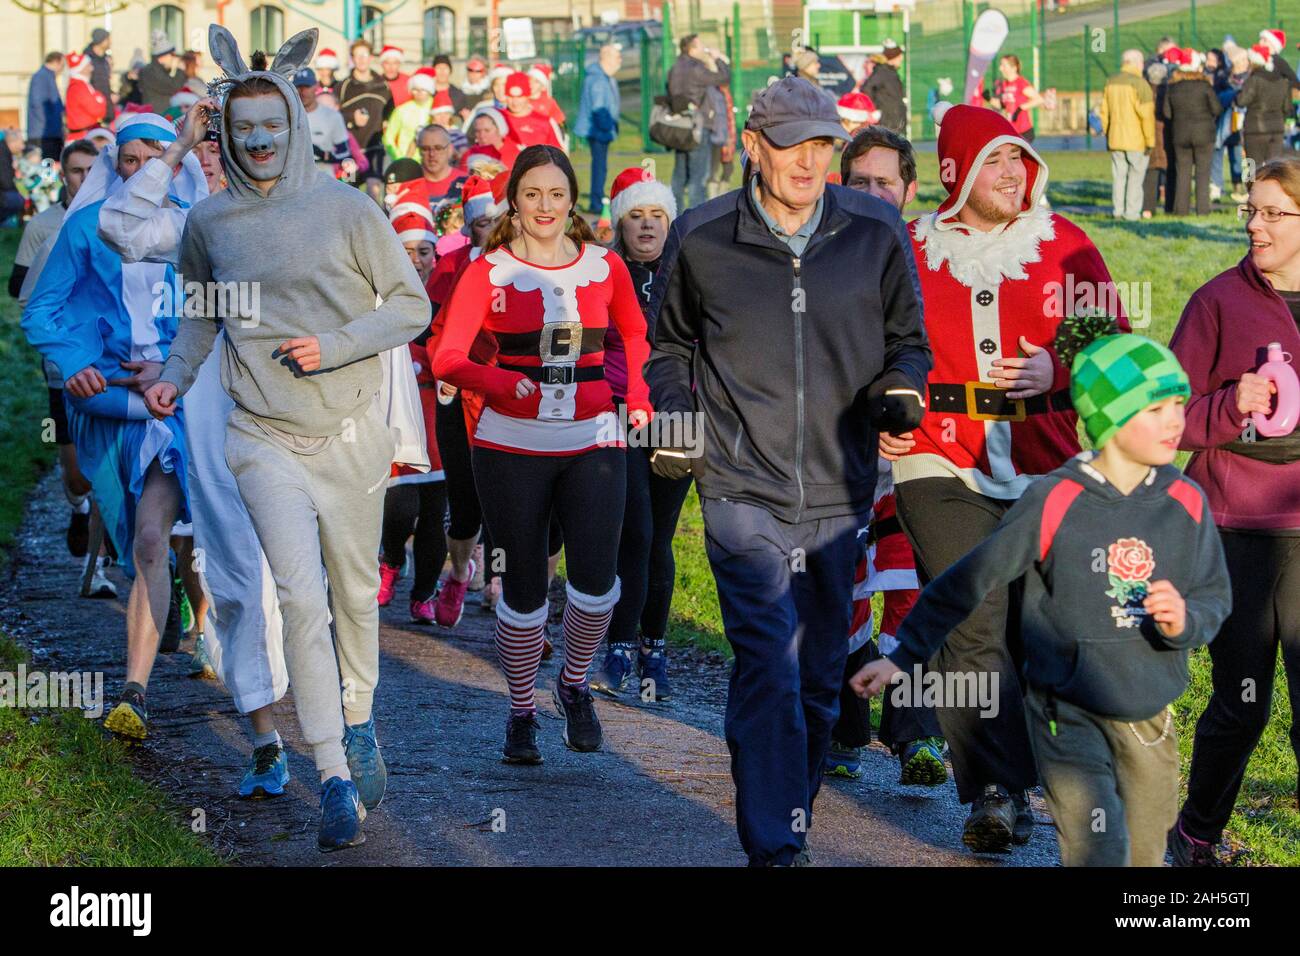 Chippenham, Wiltshire, UK. 25th December, 2019. Runners in fancy dress are pictured as they take part in an early morning Christmas day 5km parkrun in Monkton Park, Chippenham, Wiltshire. 400-500 people participated in the event with many dressing up in fancy dress. Credit: Lynchpics/Alamy Live News Stock Photo